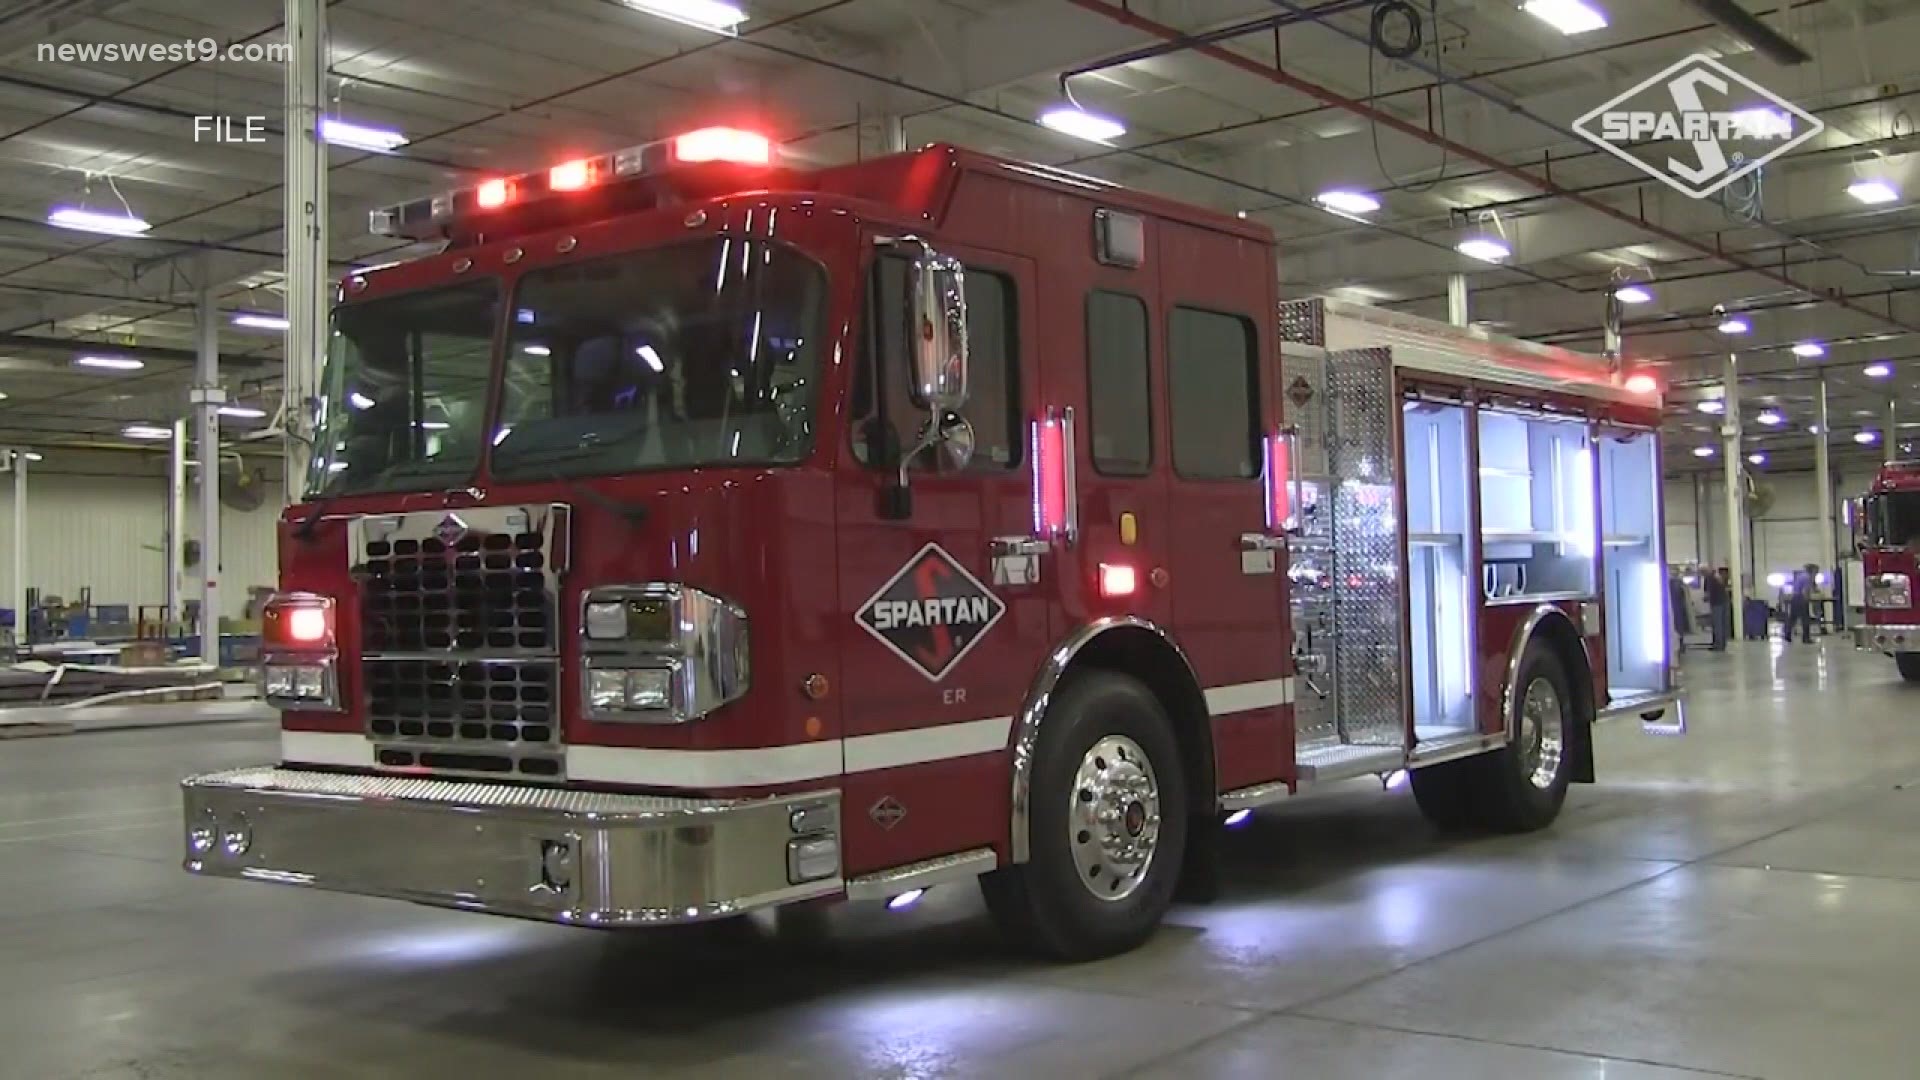 The department received $250,000 from the foundation in January to purchase new fire equipment.